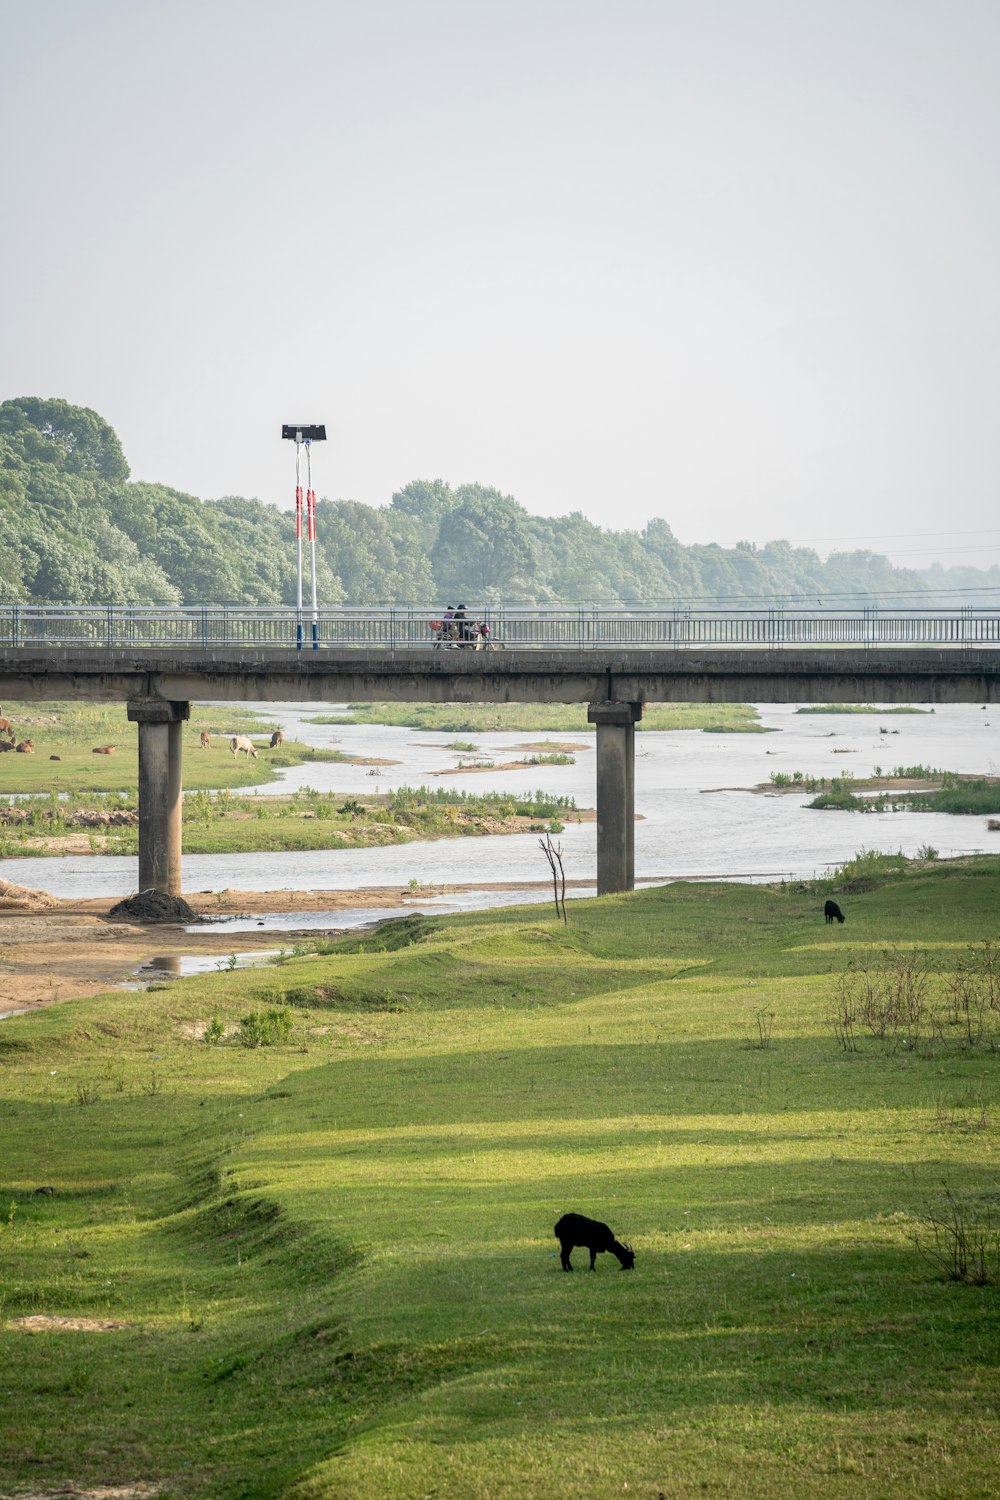 a dog on a grassy field with a bridge in the background